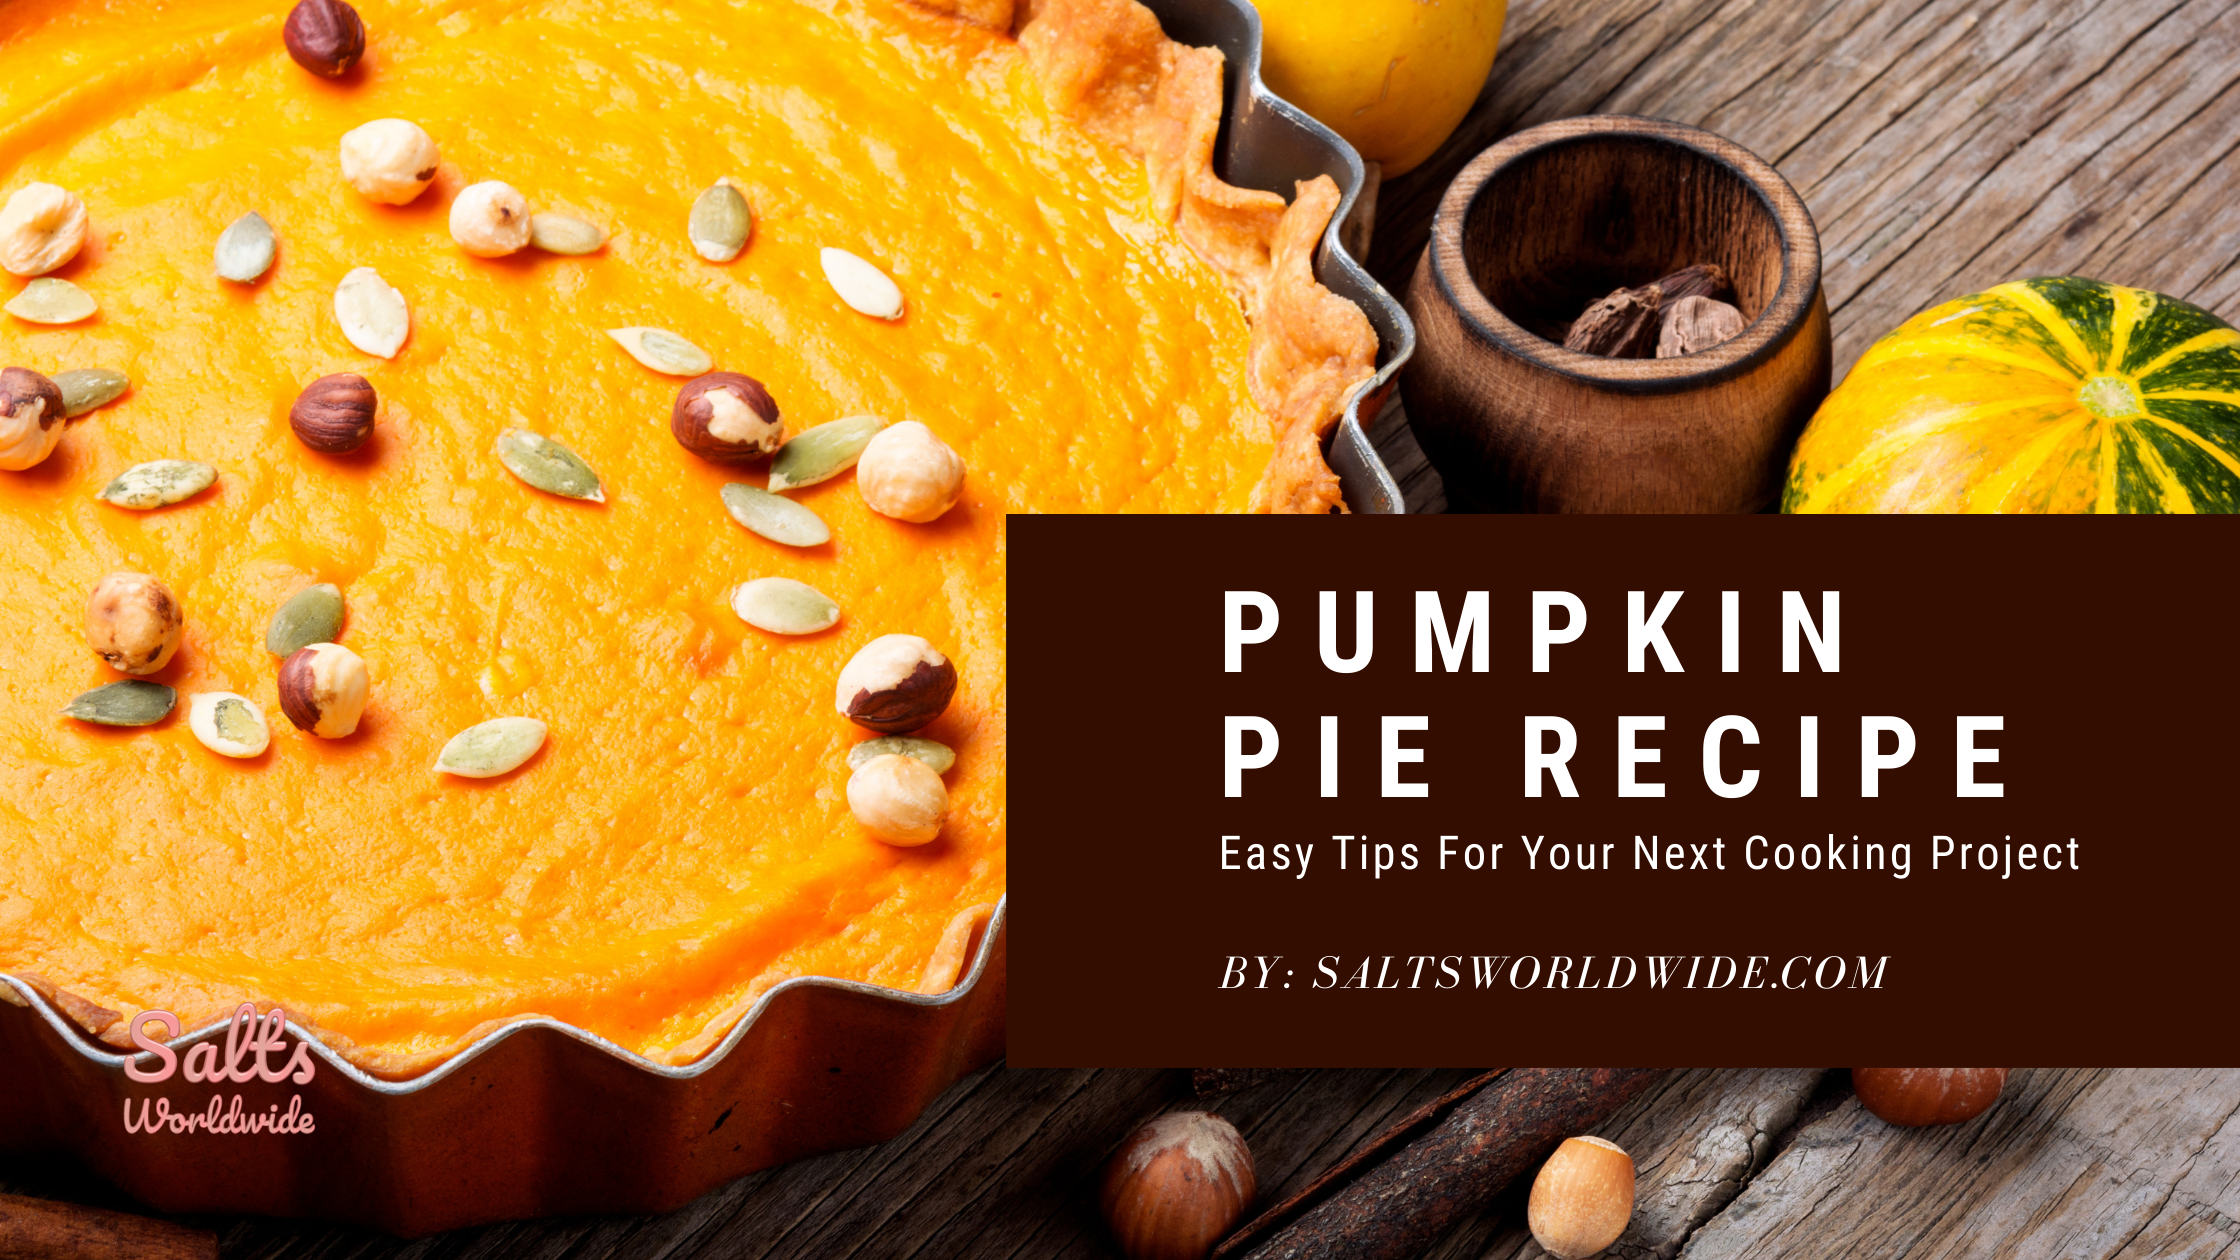 Pumpkin Pie Recipe - Easy Tips For Your Next Cooking Project